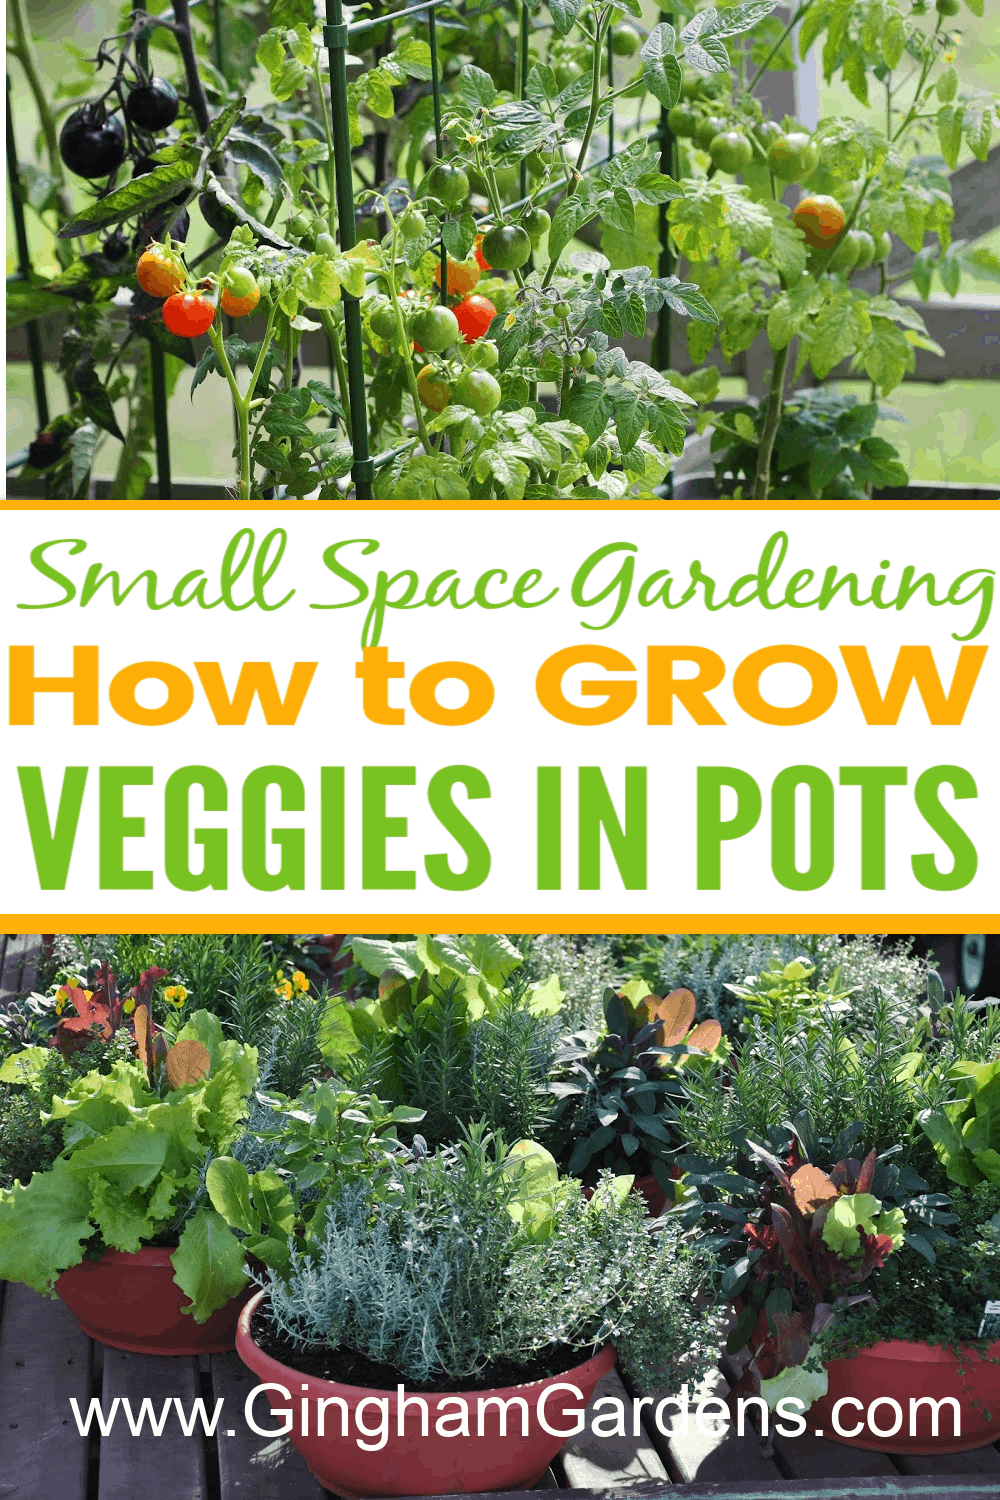 Images of Veggies growing in pots with text overlay How to Grow Veggies in Pots